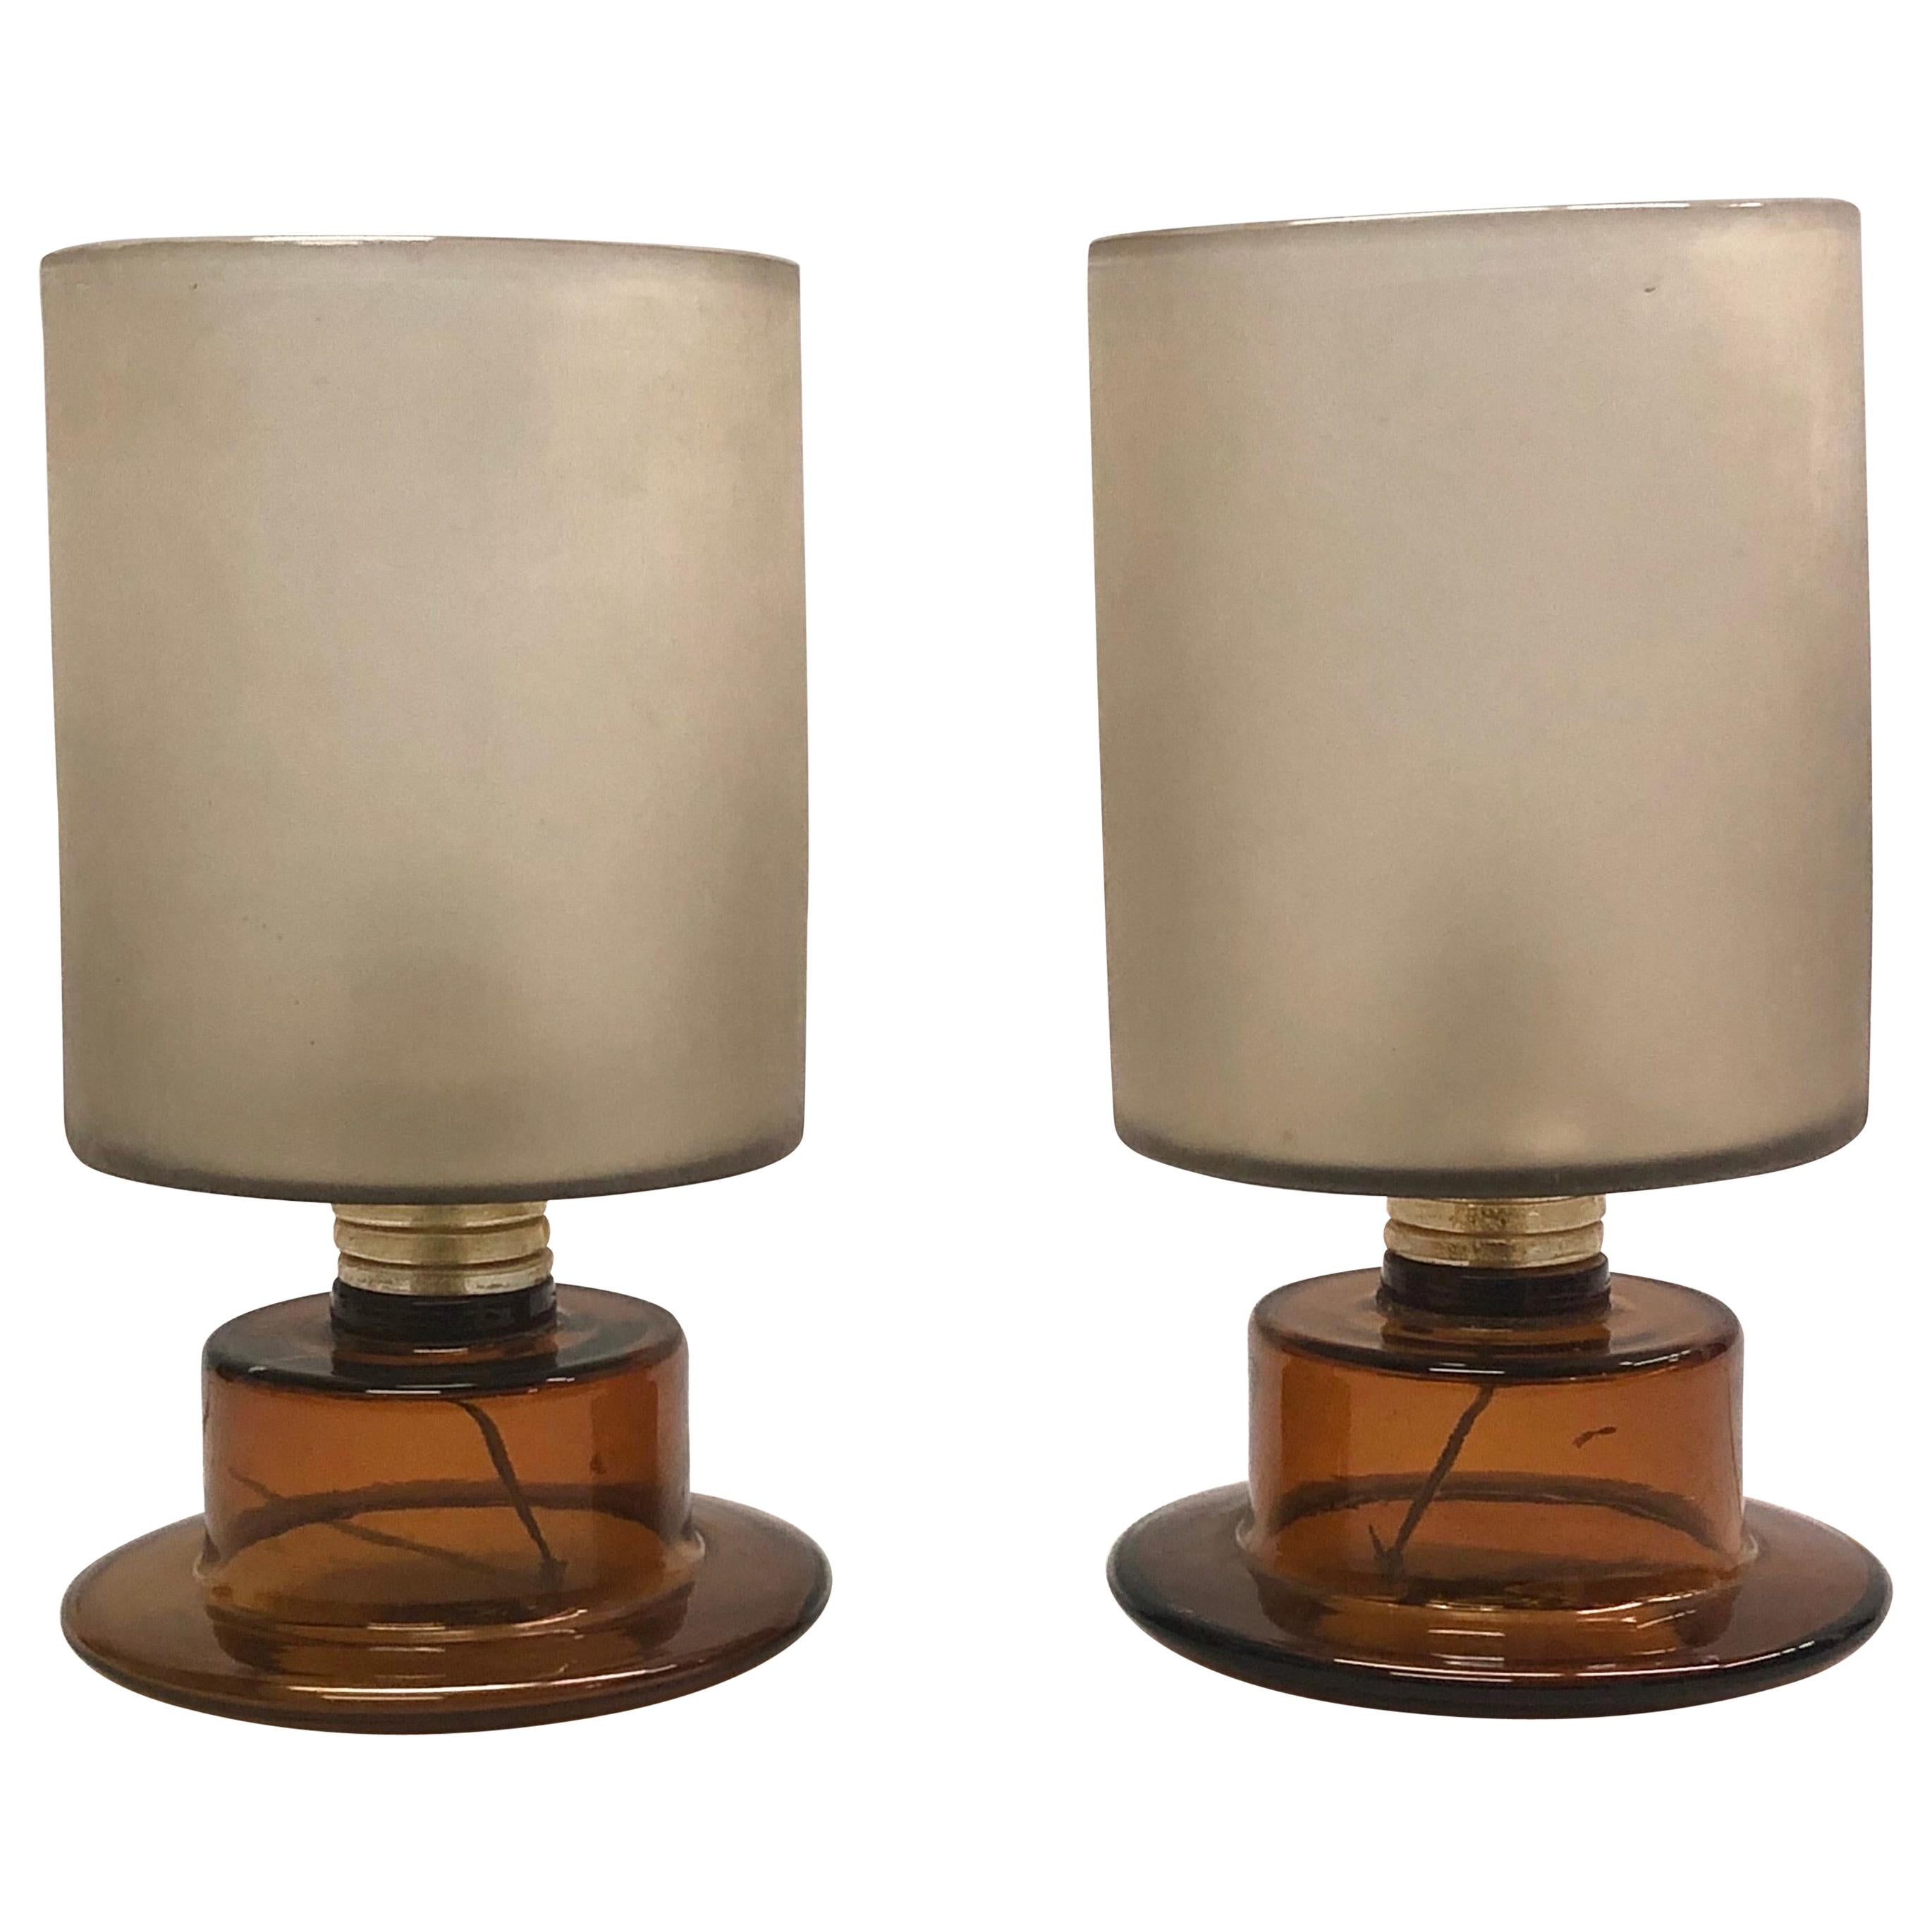 Pair of Italian Mid-Century Modern Murano Glass Table Lamps by Seguso